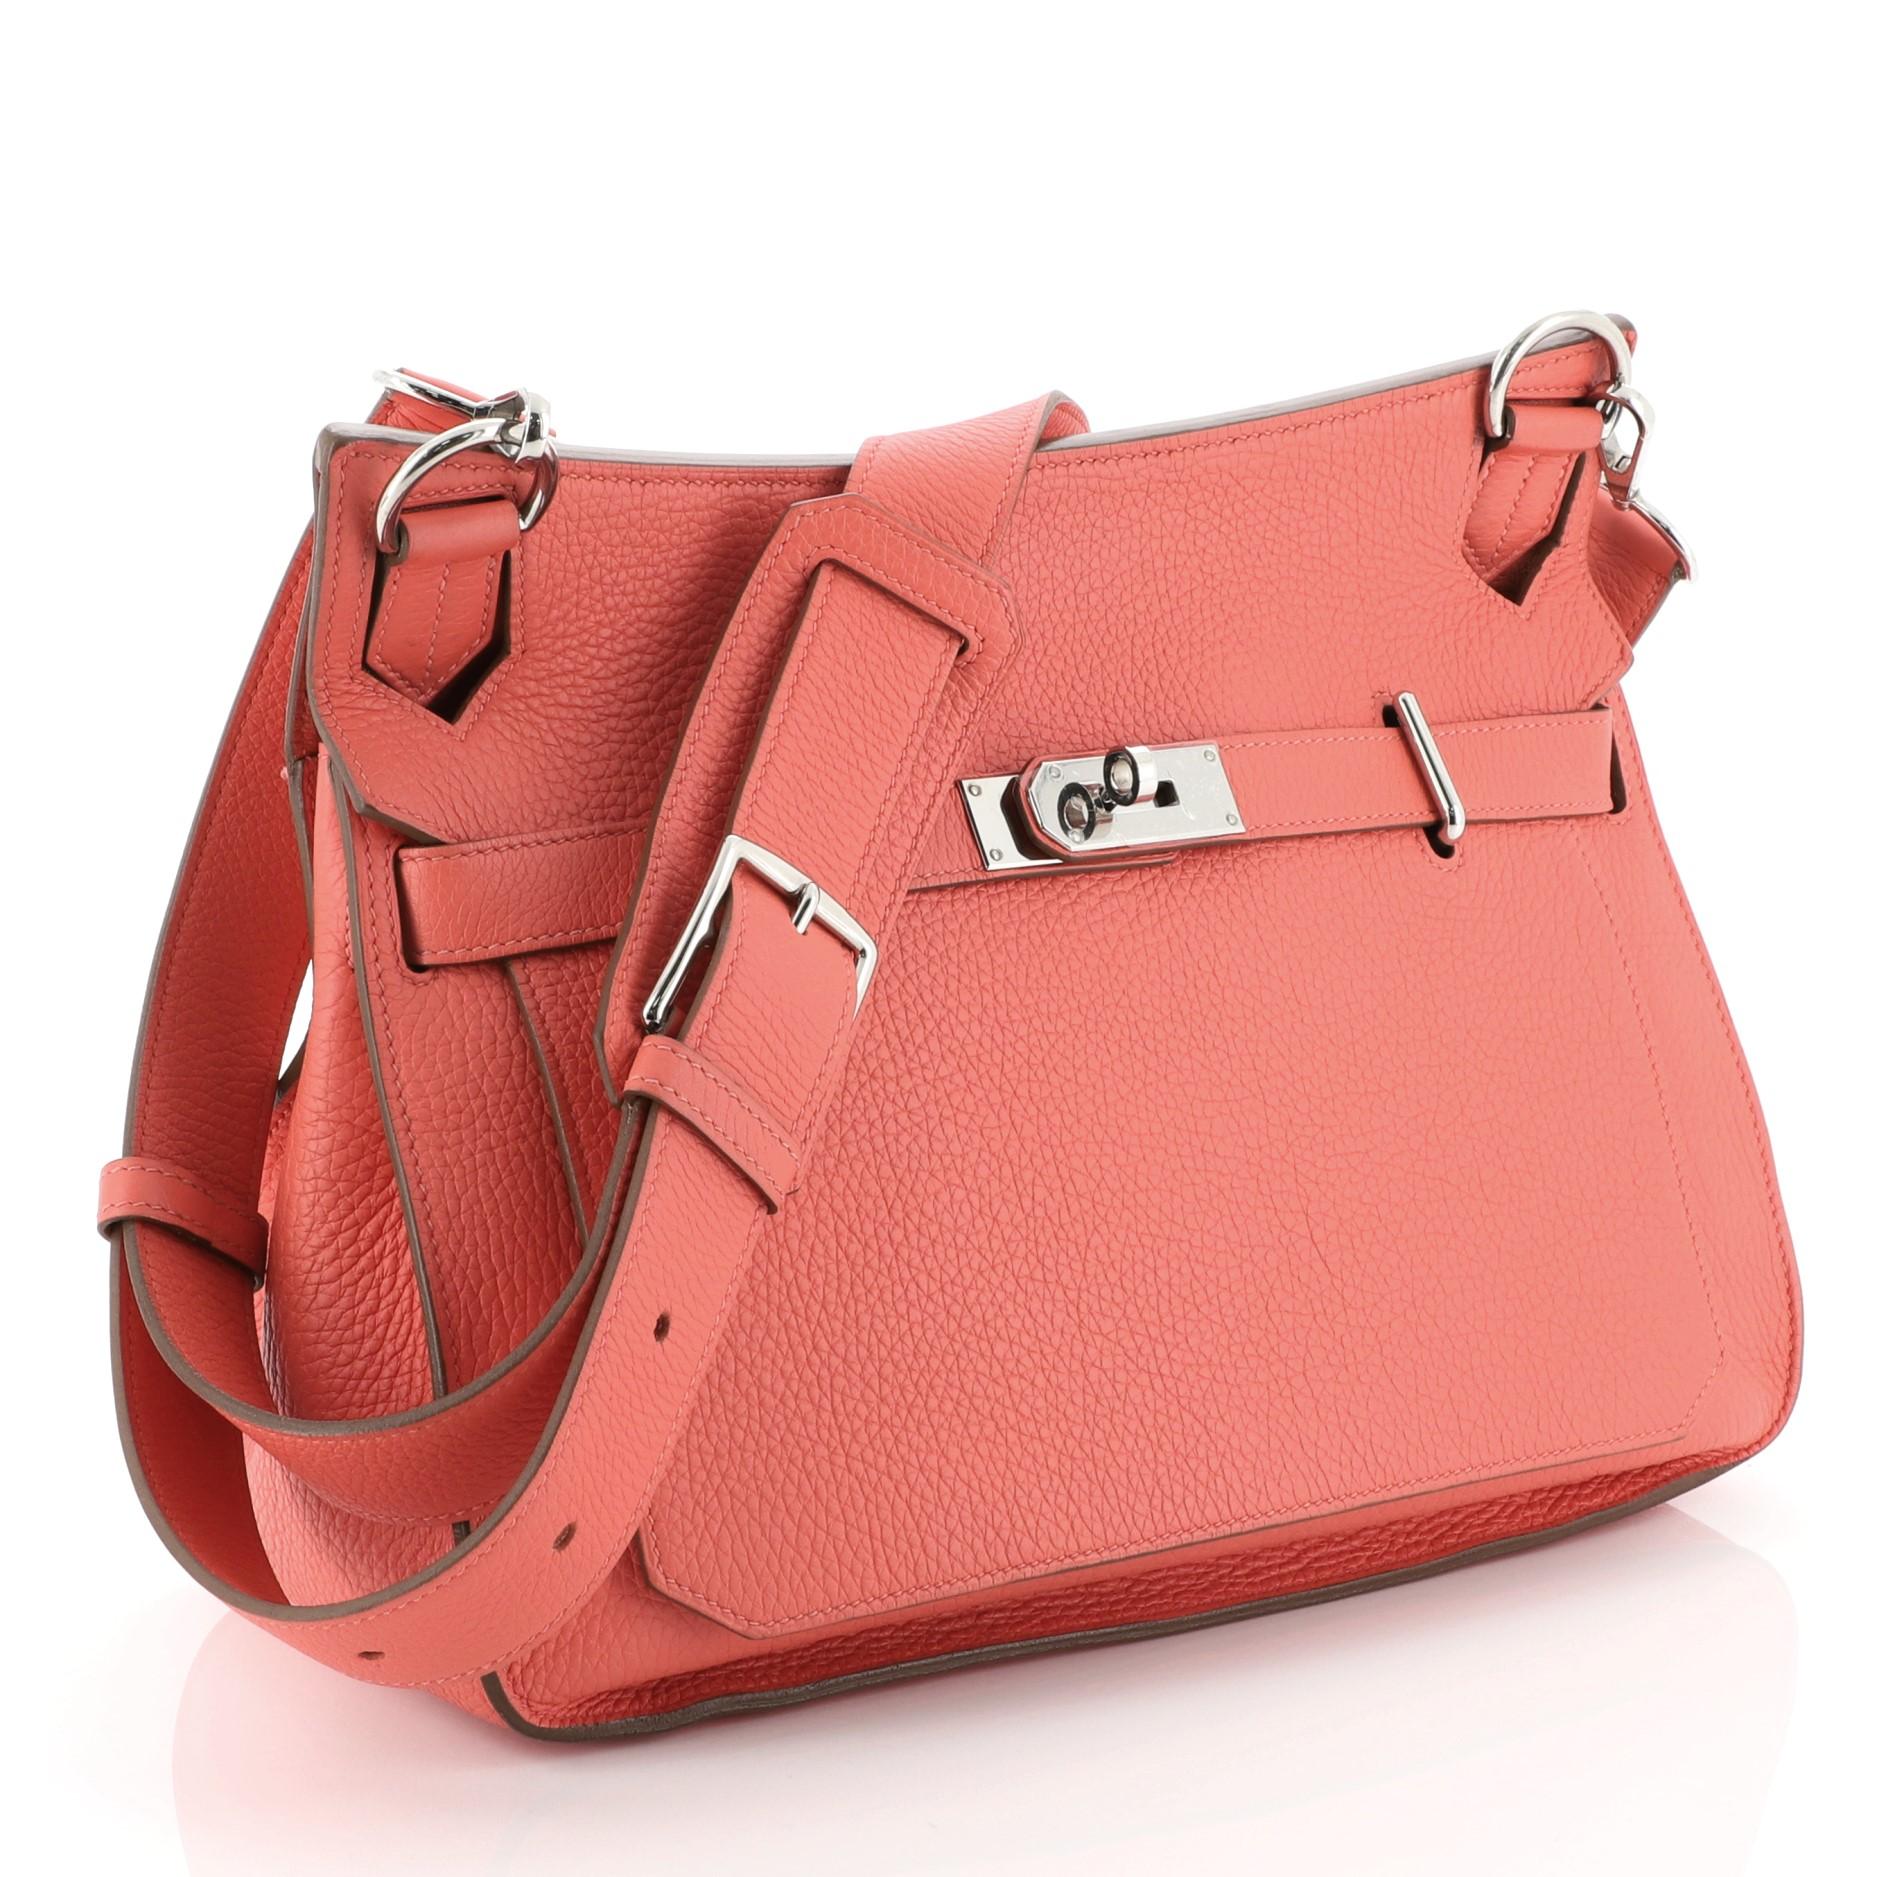 This Hermes Jypsiere Handbag Clemence 34, crafted in Rose Jaipur pink Clemence leather, features a long adjustable strap and palladium hardware. Its front flap with the turn-lock closure opens to a Rose Jaipur pink Chevre leather interior with slip